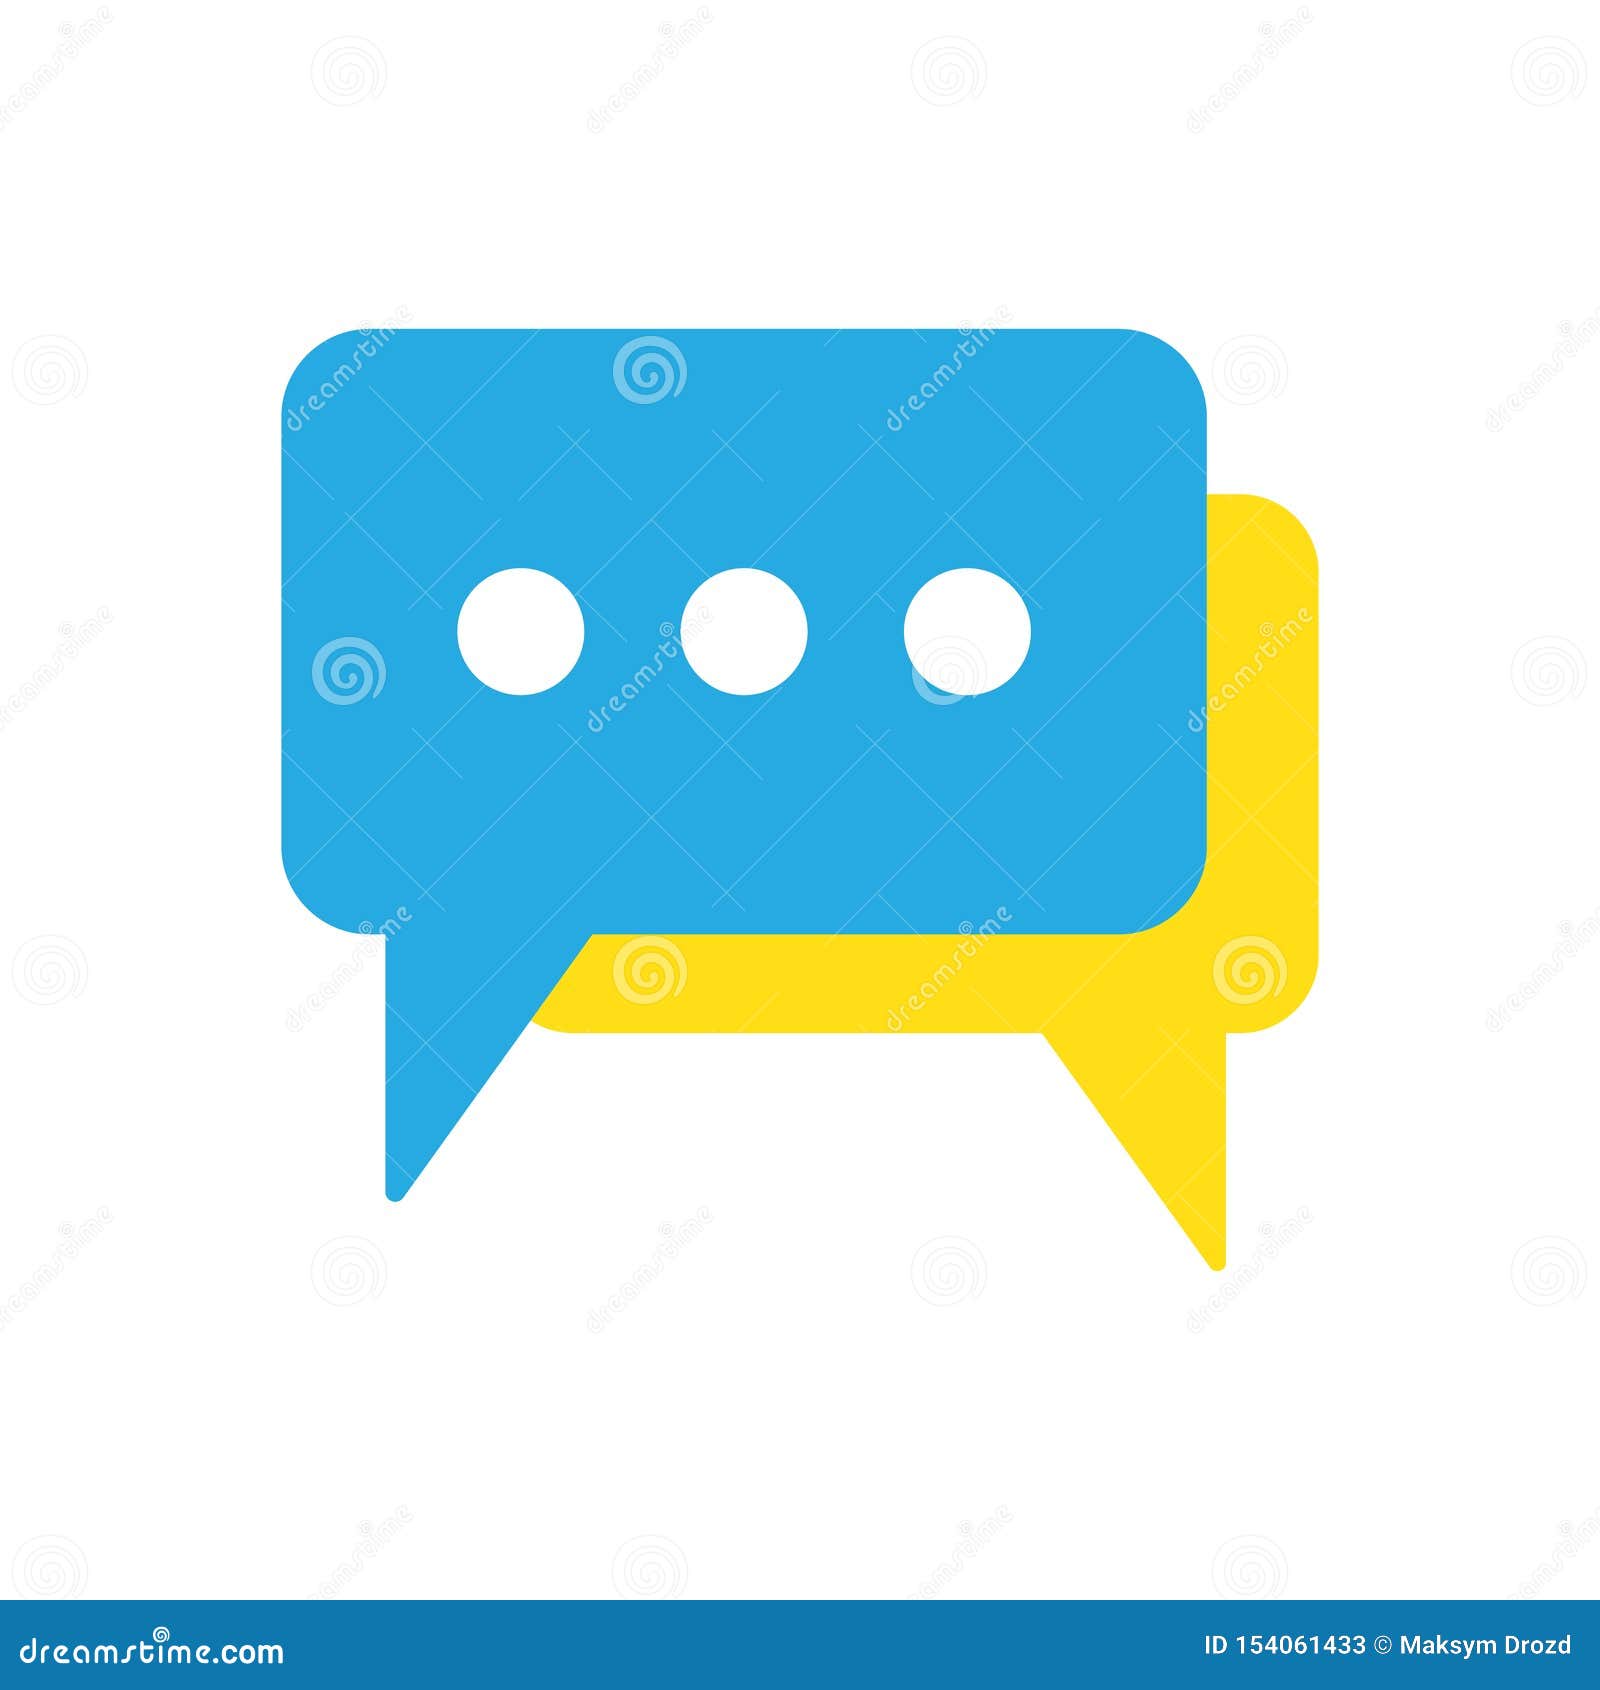 Sms chat forum